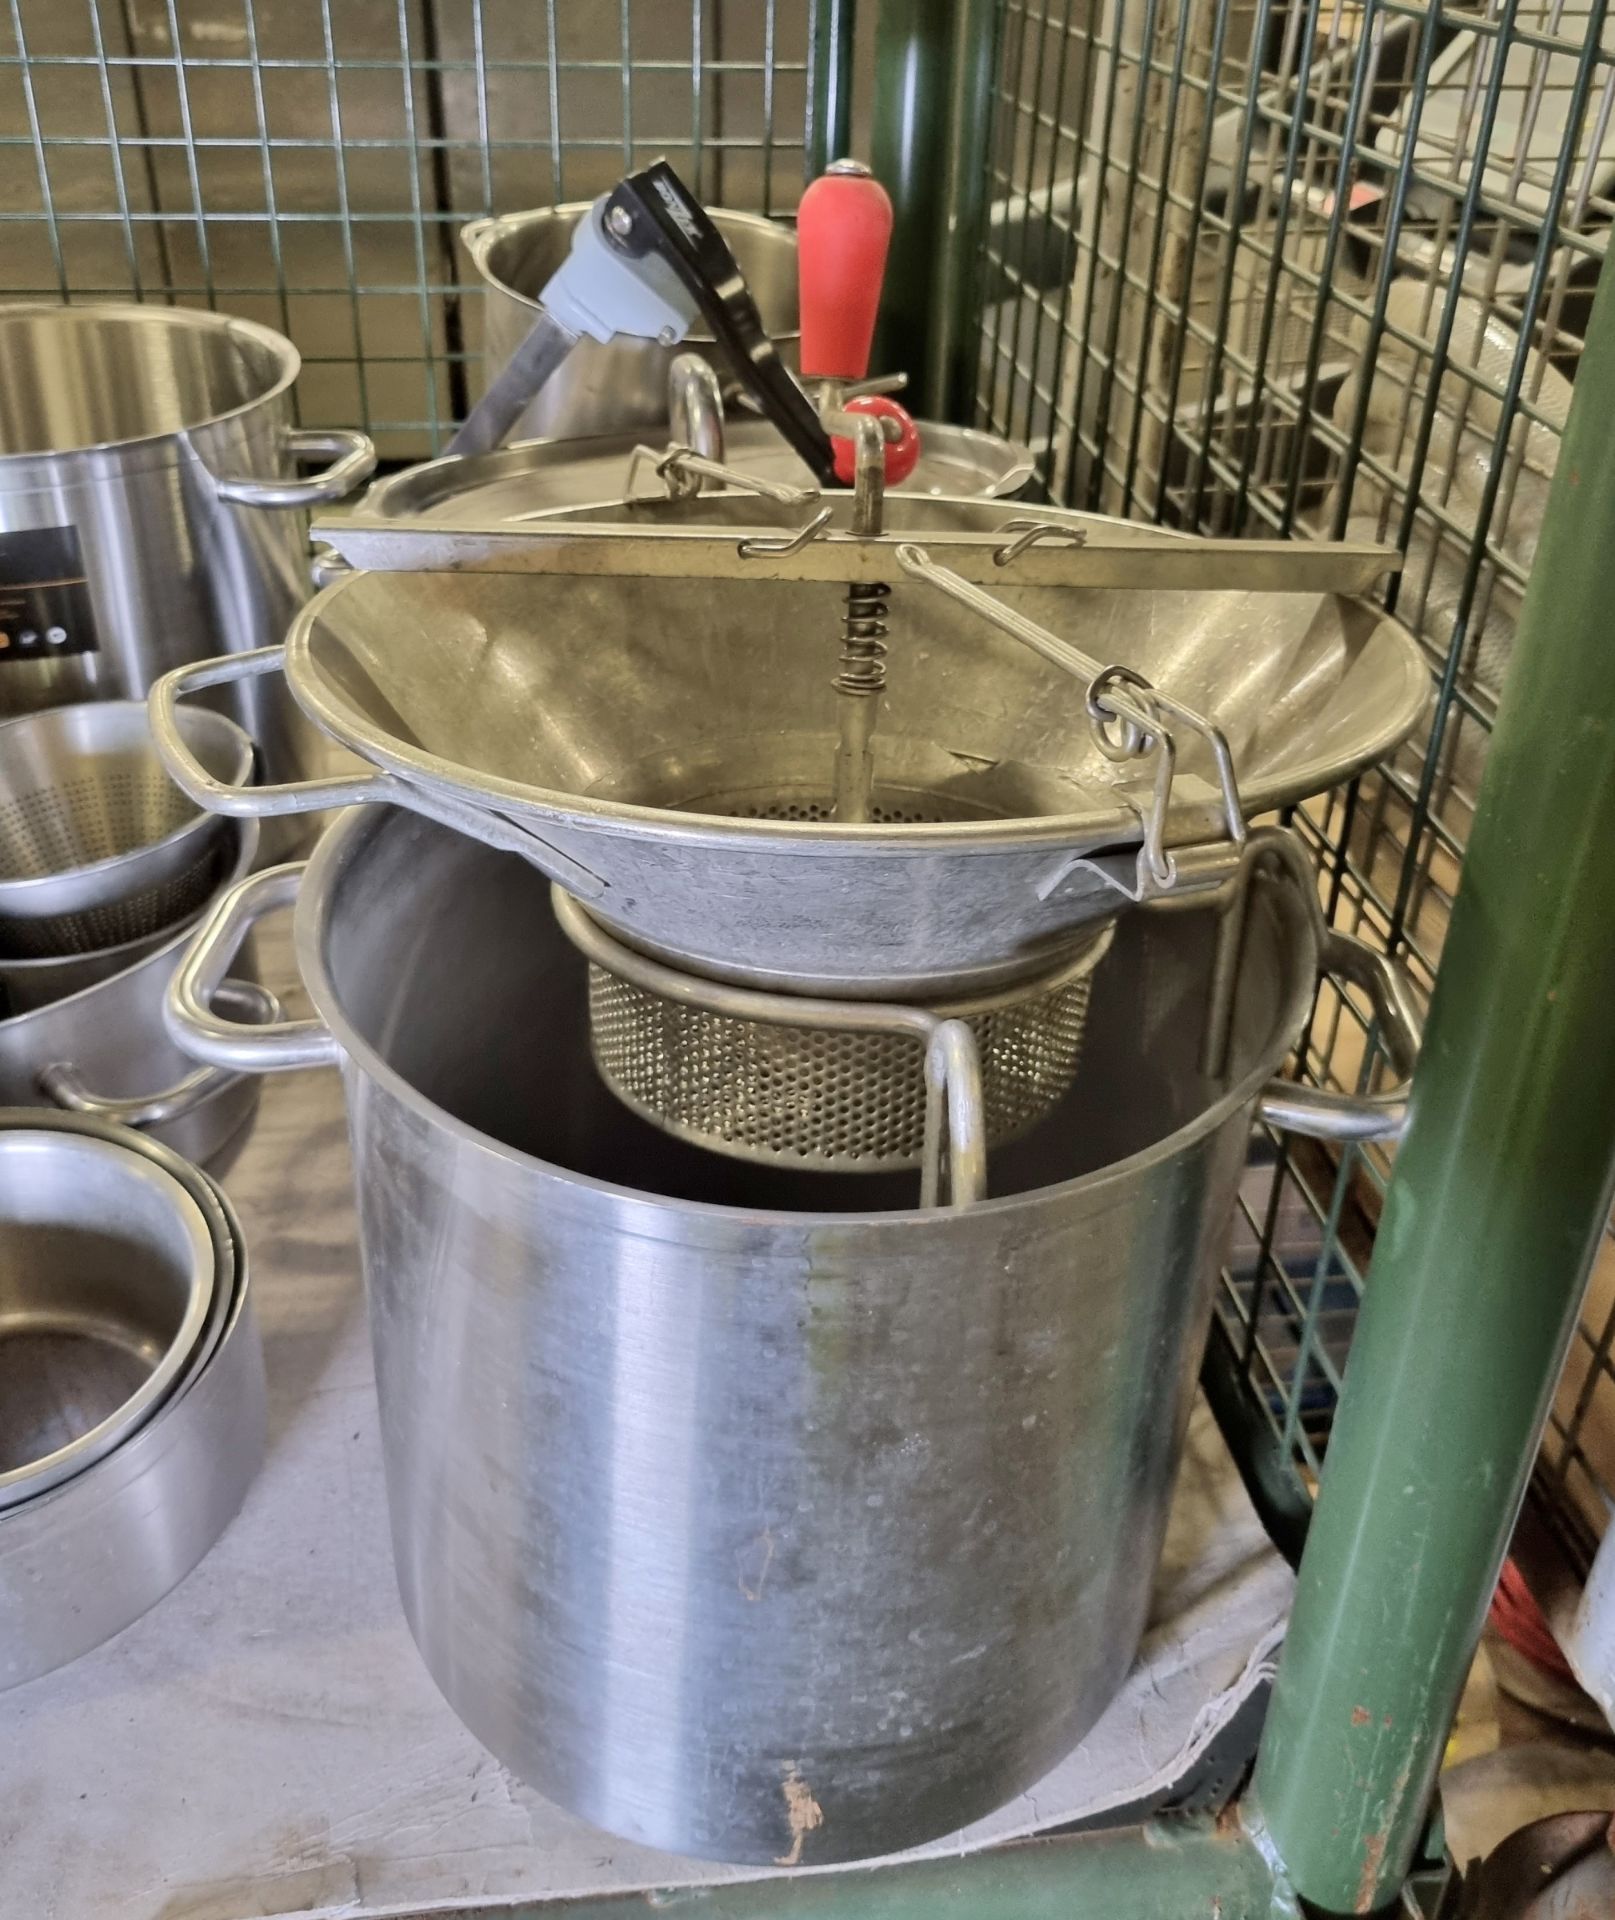 Catering spares - stainless steel pots mixed shapes and sizes - soup kettles - Image 2 of 4